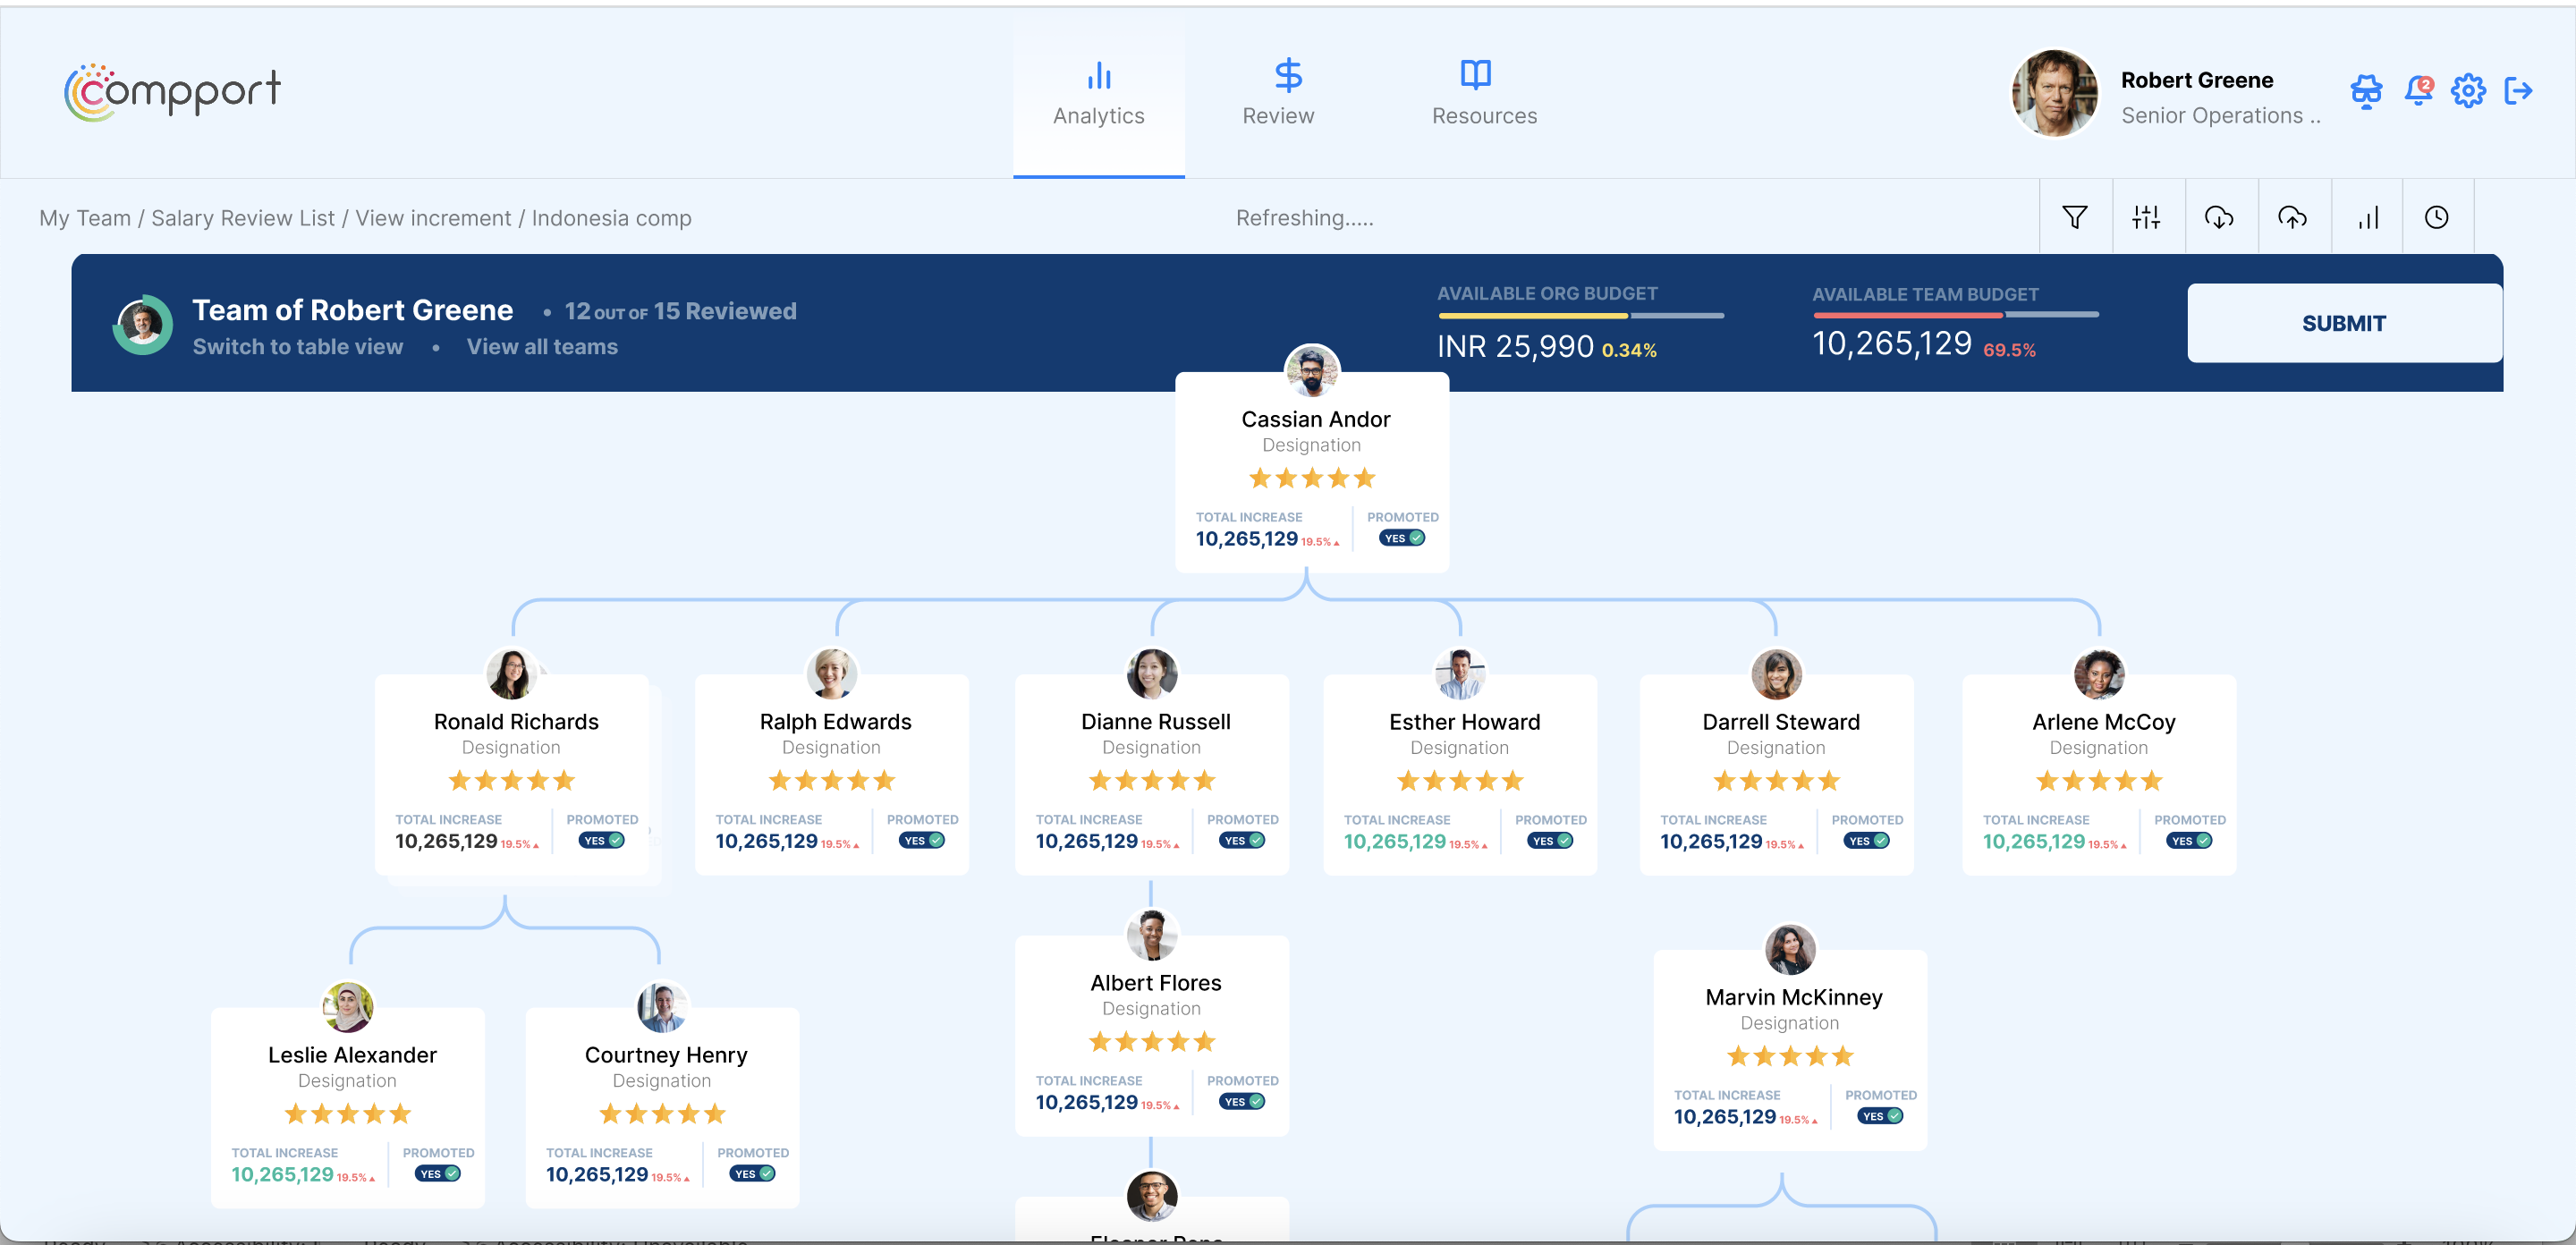 Compport offers an intuitive dashboard for Team Structuring, Growth, and Increments. Easily visualize team composition, track individual progress, and make data-driven decisions. Optimize team management with Compport's comprehensive insights.